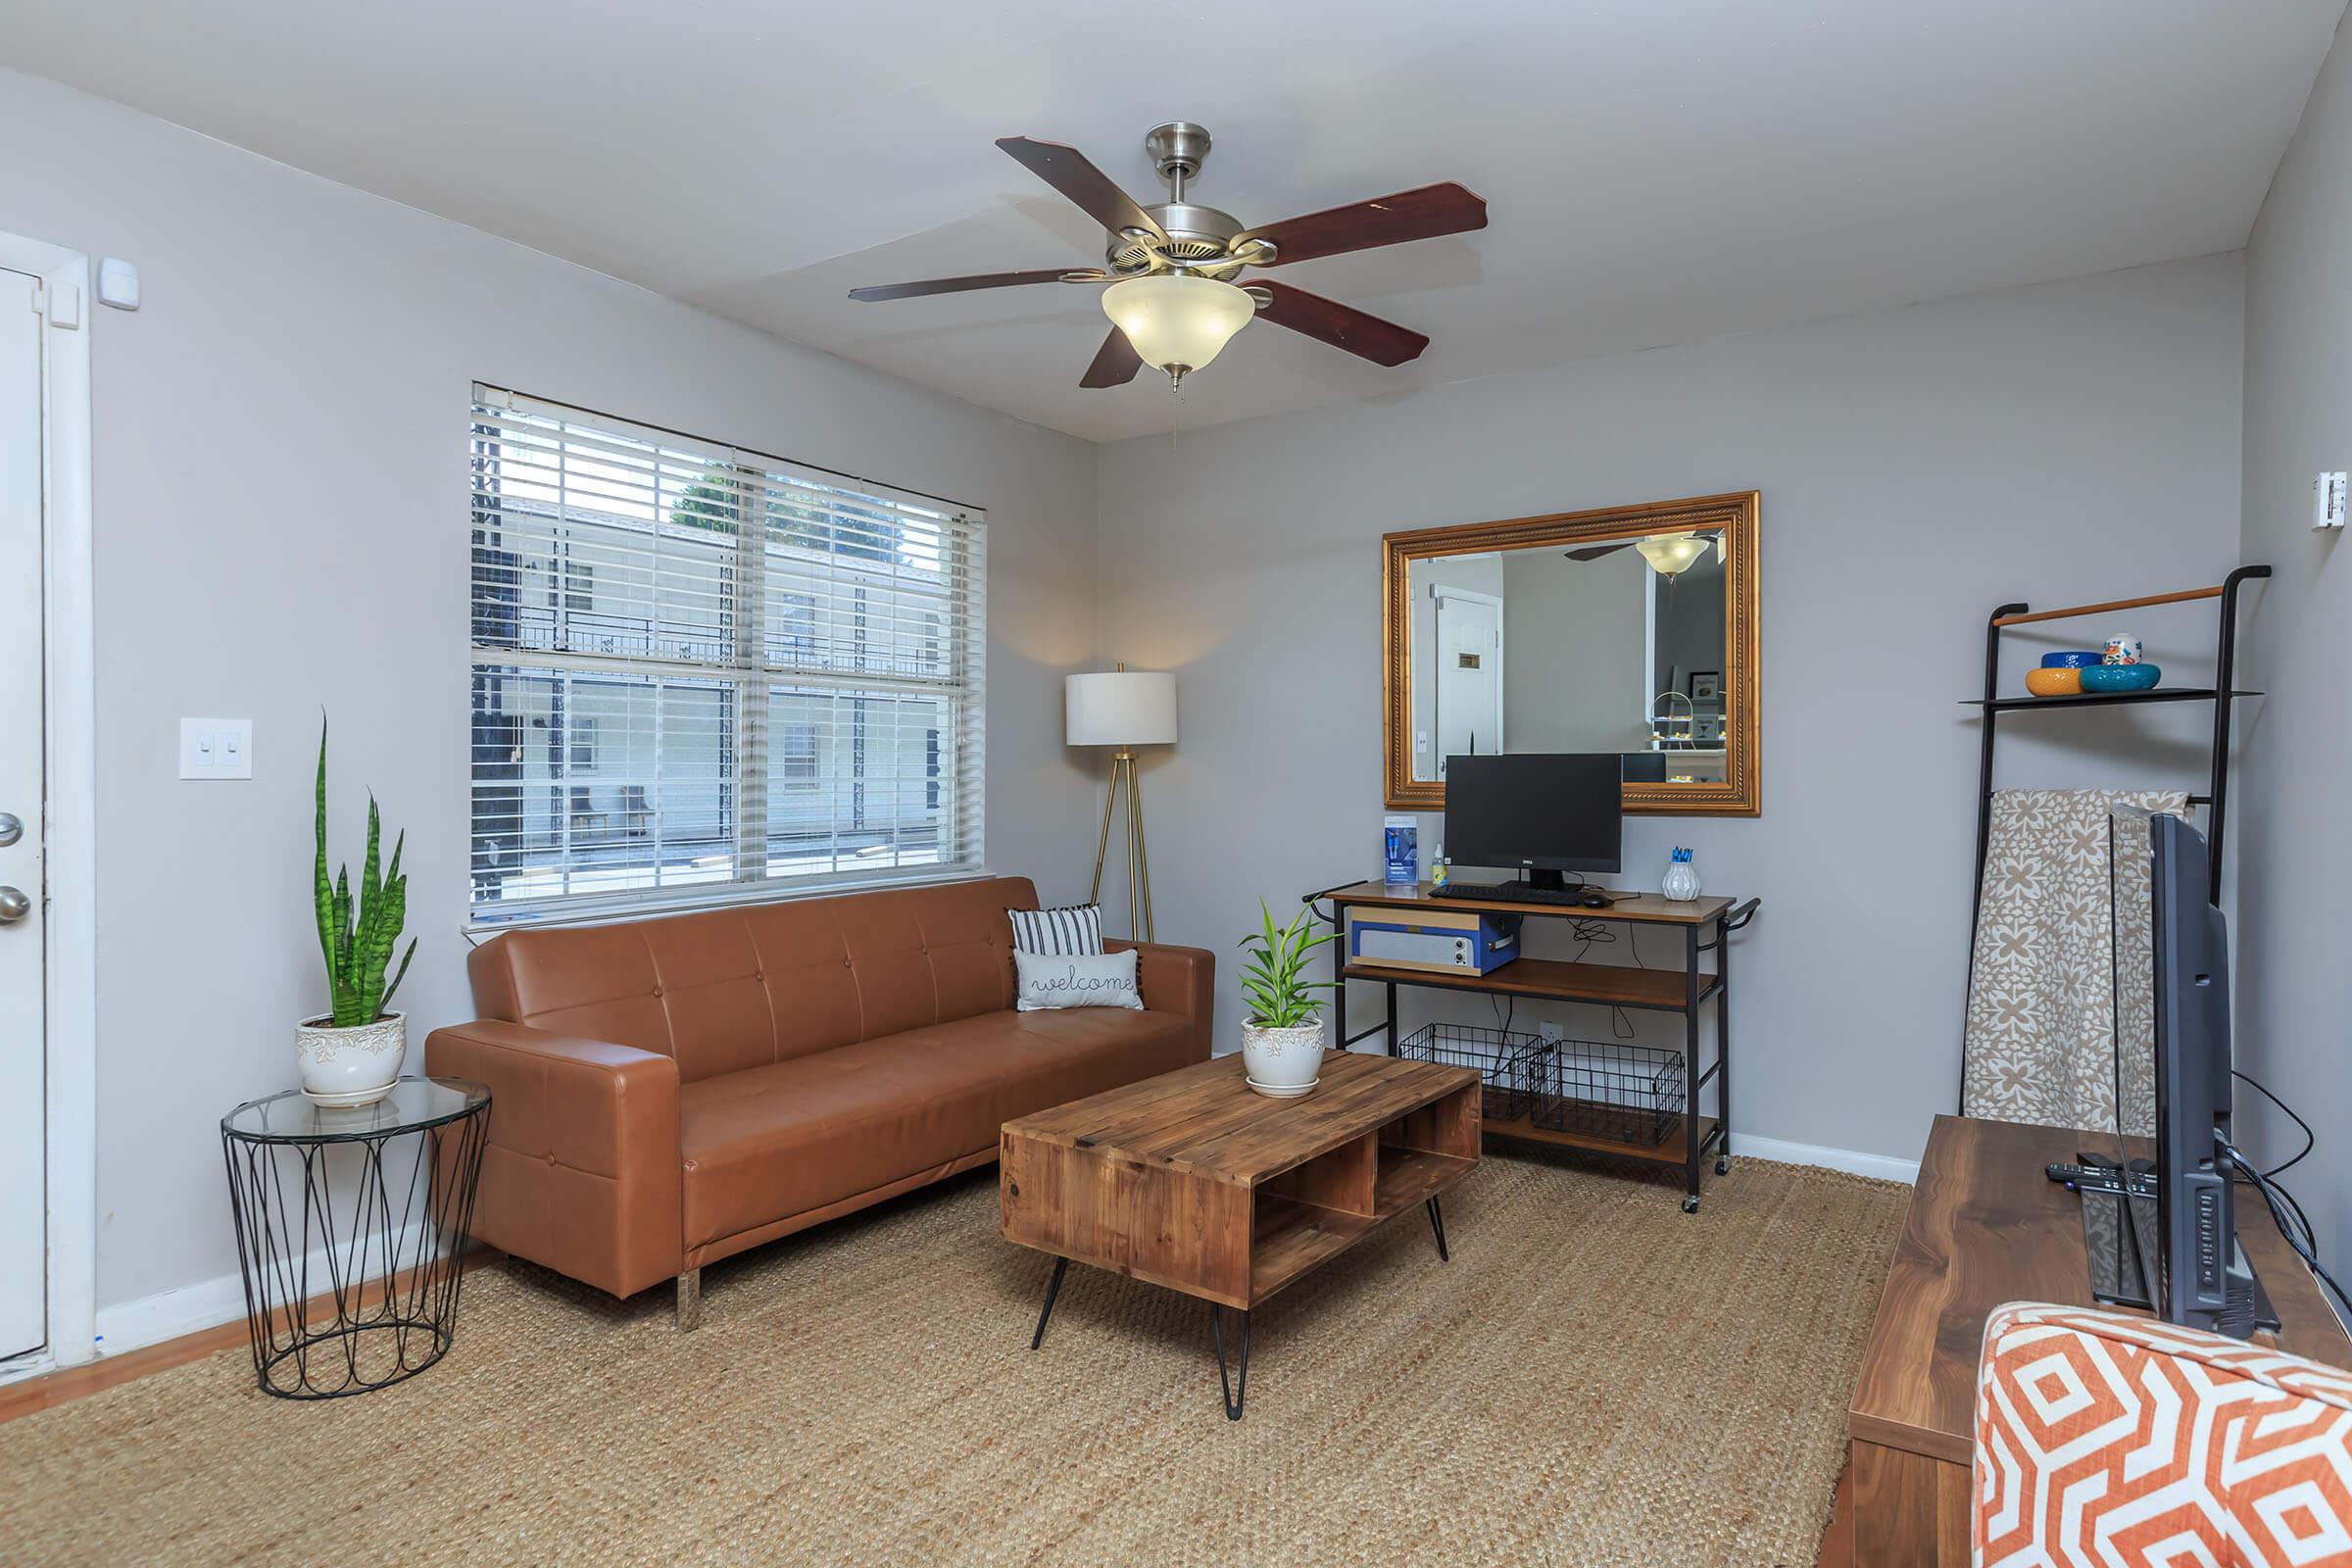 SPACIOUS LIVING ROOMS AT THE PARK AT PEACHTREE HILLS